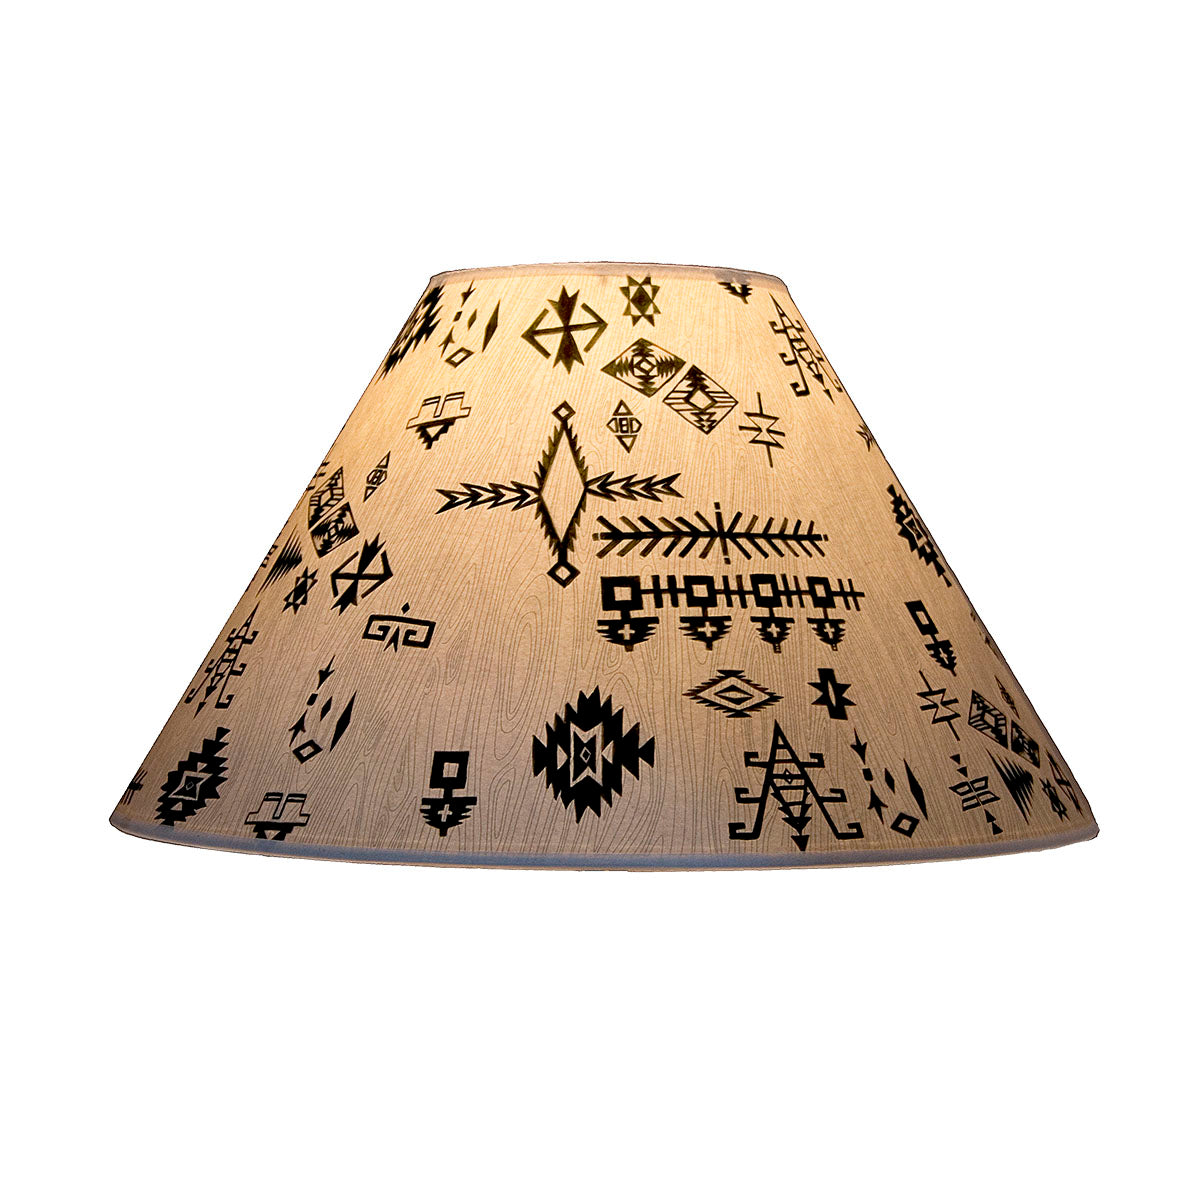 Janna Ugone &amp; Co Lamp Shades Medium Conical Lamp Shade in Blanket Sketches